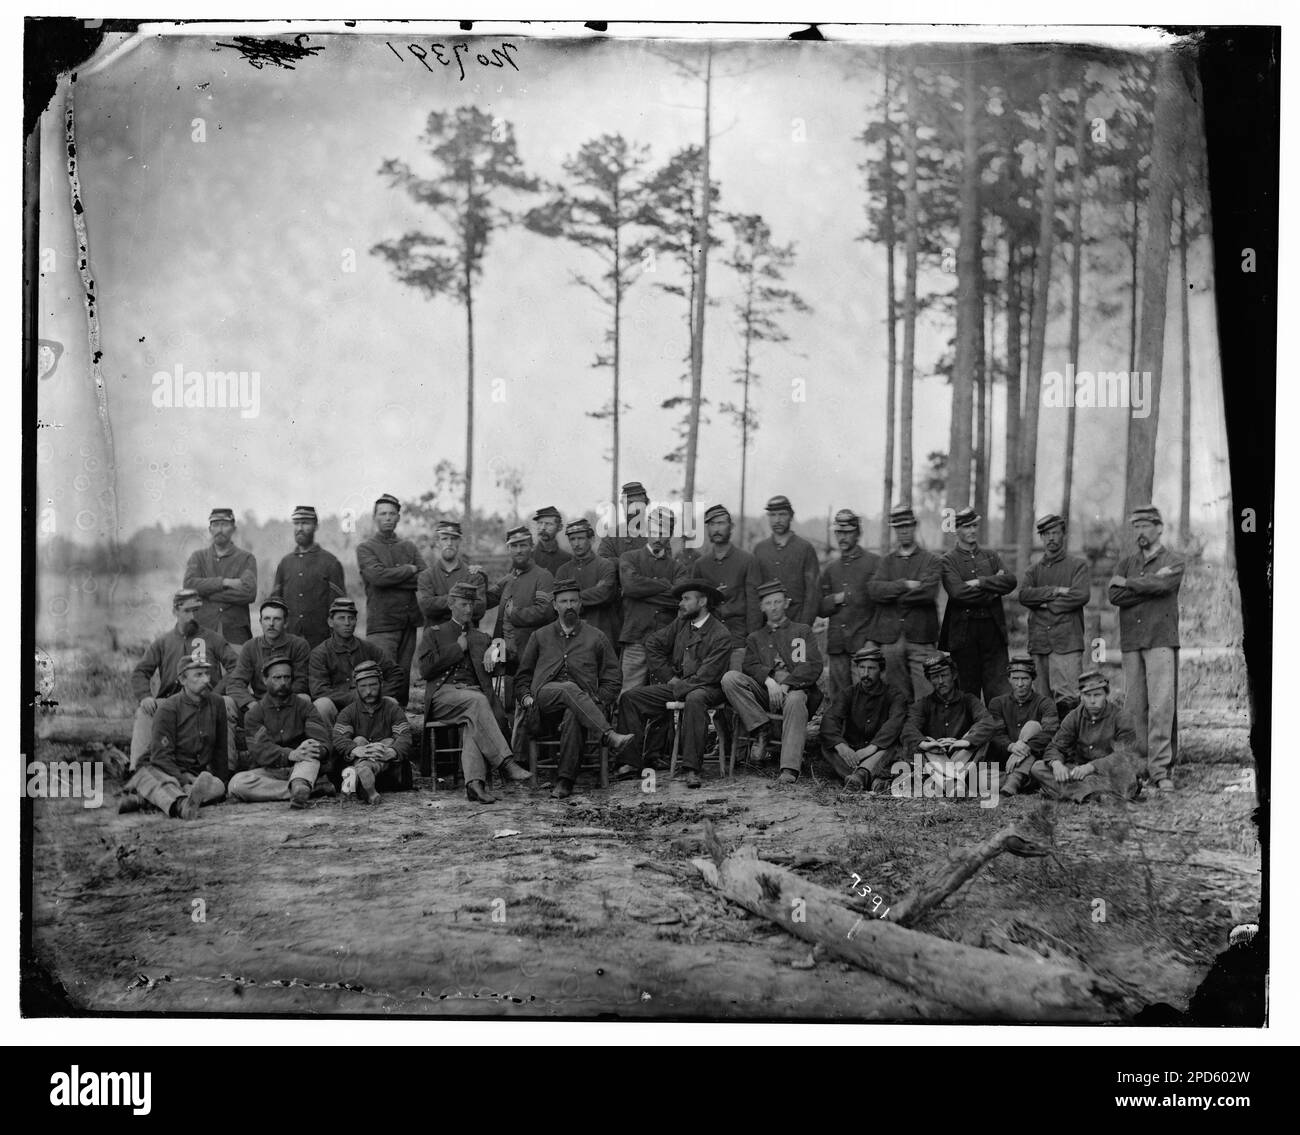 Petersburg, Virginia. Non-commissioned officers, 1st Massachusetts Cavalry at Army of the Potomac headquarters. Civil war photographs, 1861-1865 . United States, History, Civil War, 1861-1865. Stock Photo